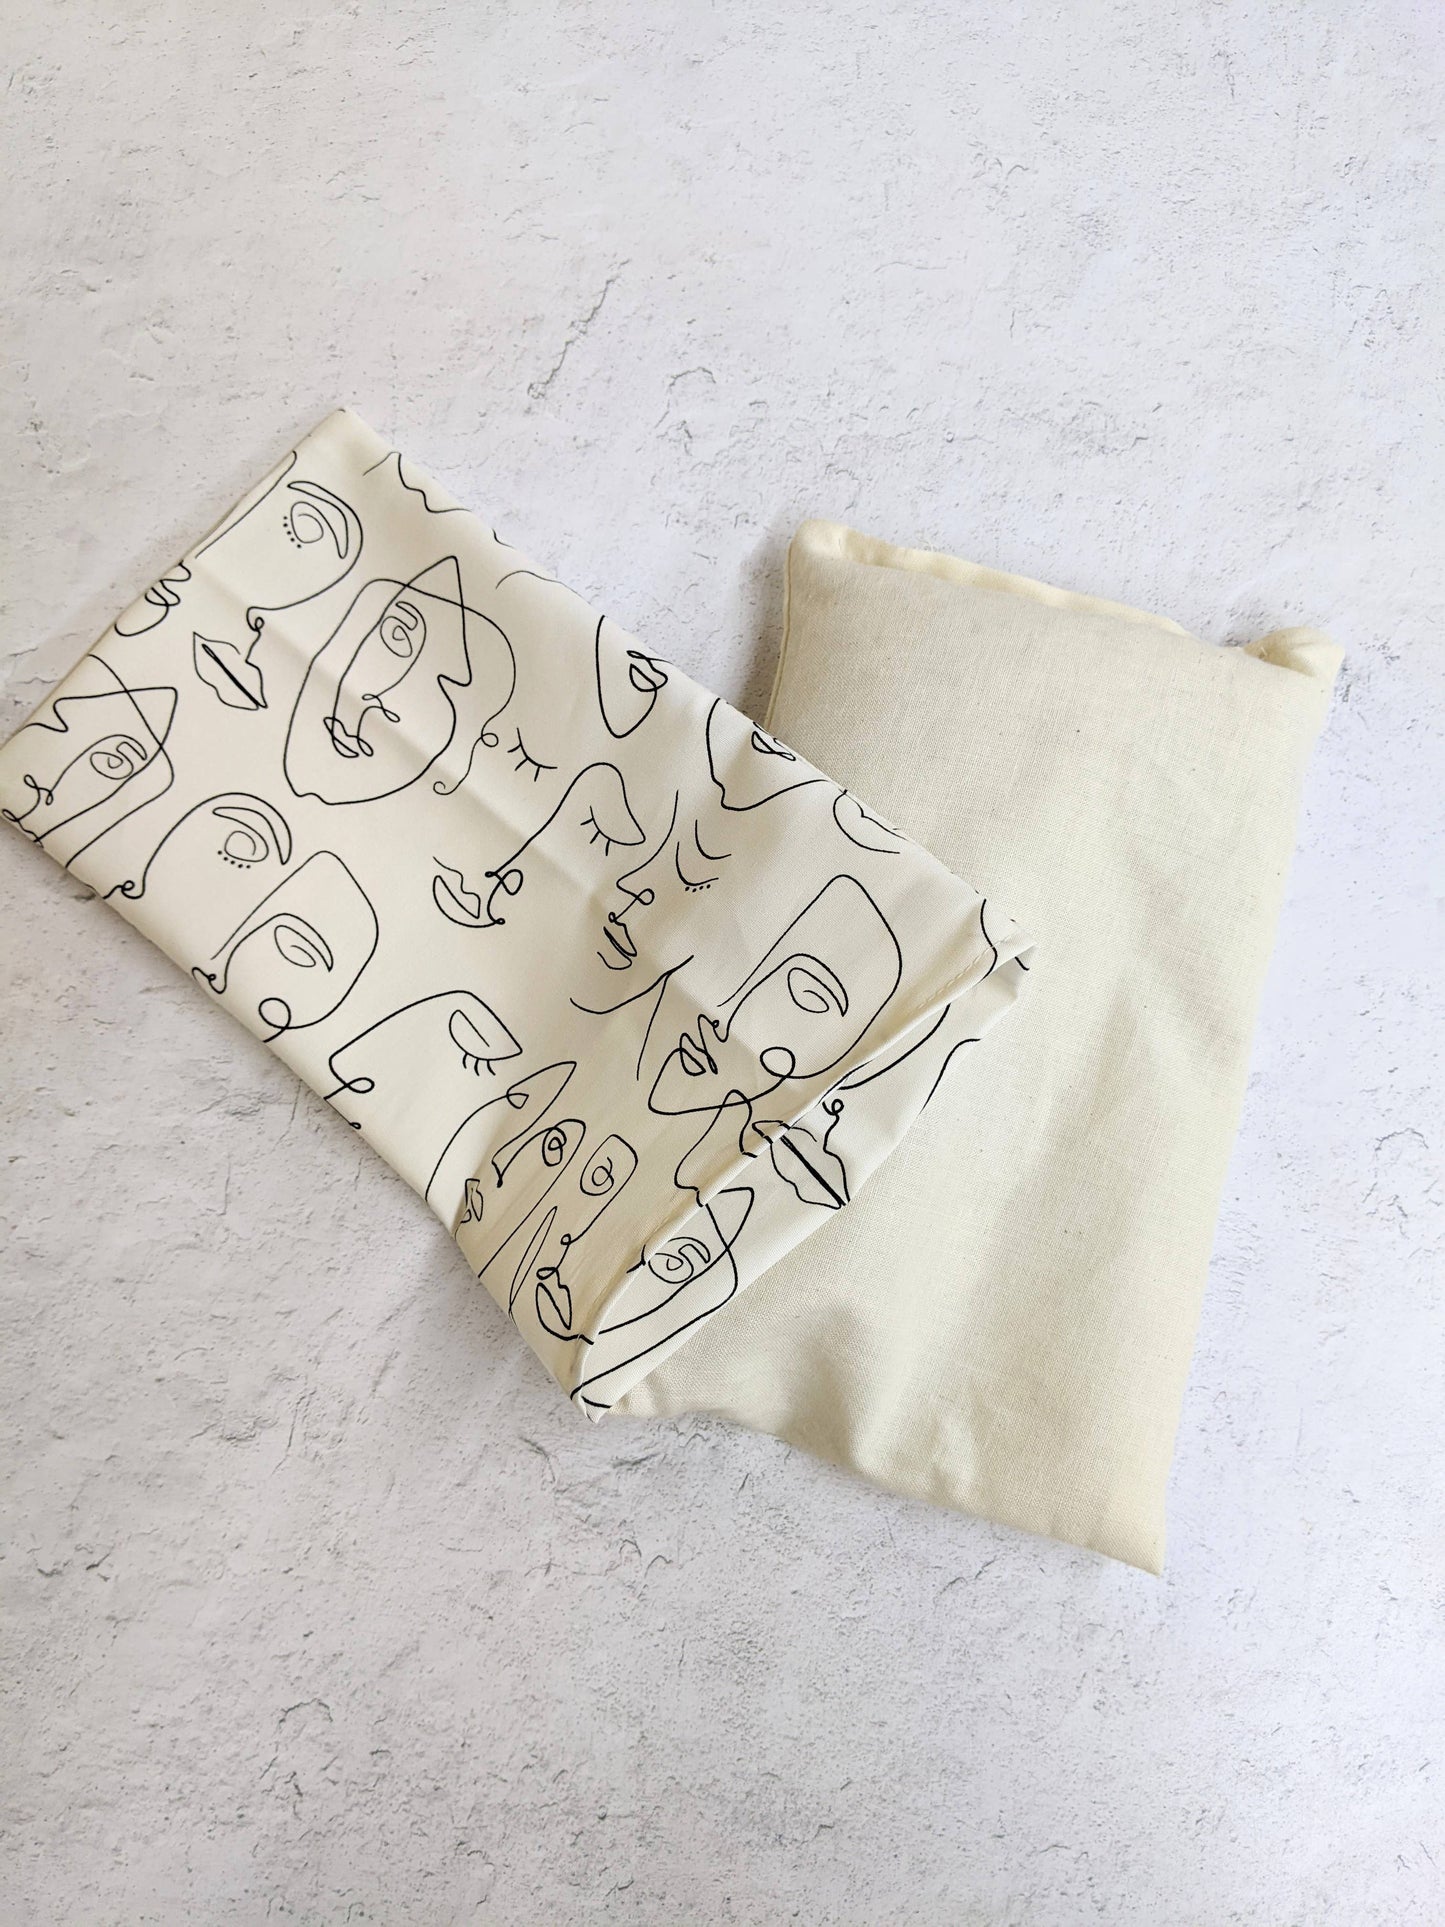 Weighted Aromatherapy Eye Pillow - Picasso Faces